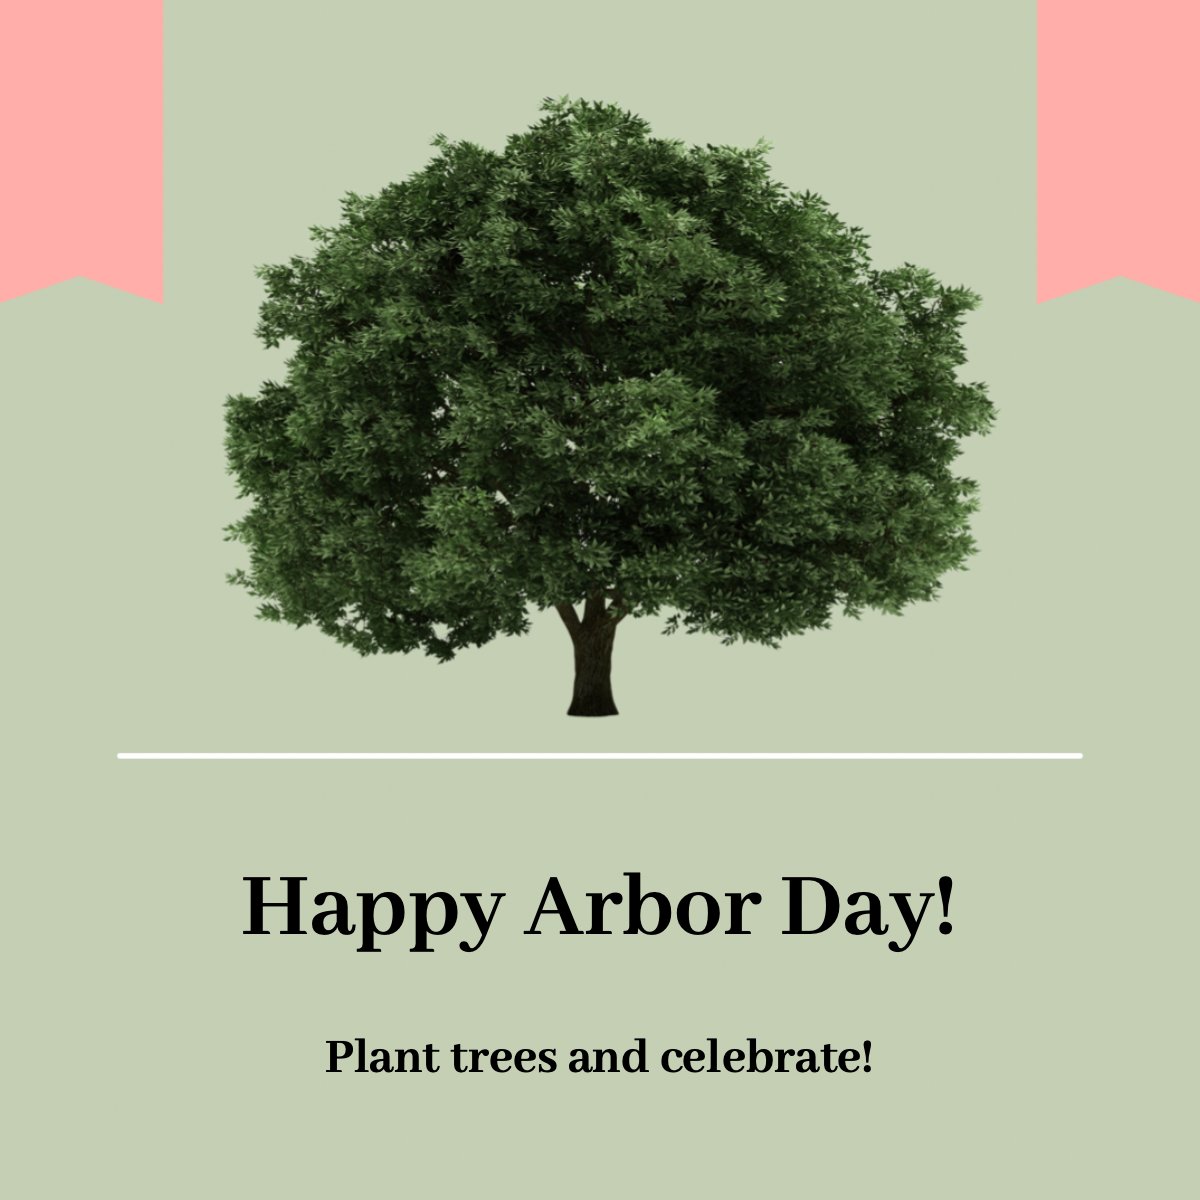 'There's nothing wrong with having a tree as a friend.' – Bob Ross

Happy Arbor Day 🌲!

#arborday #trees #dayforthetrees #blue #white #black #sunset